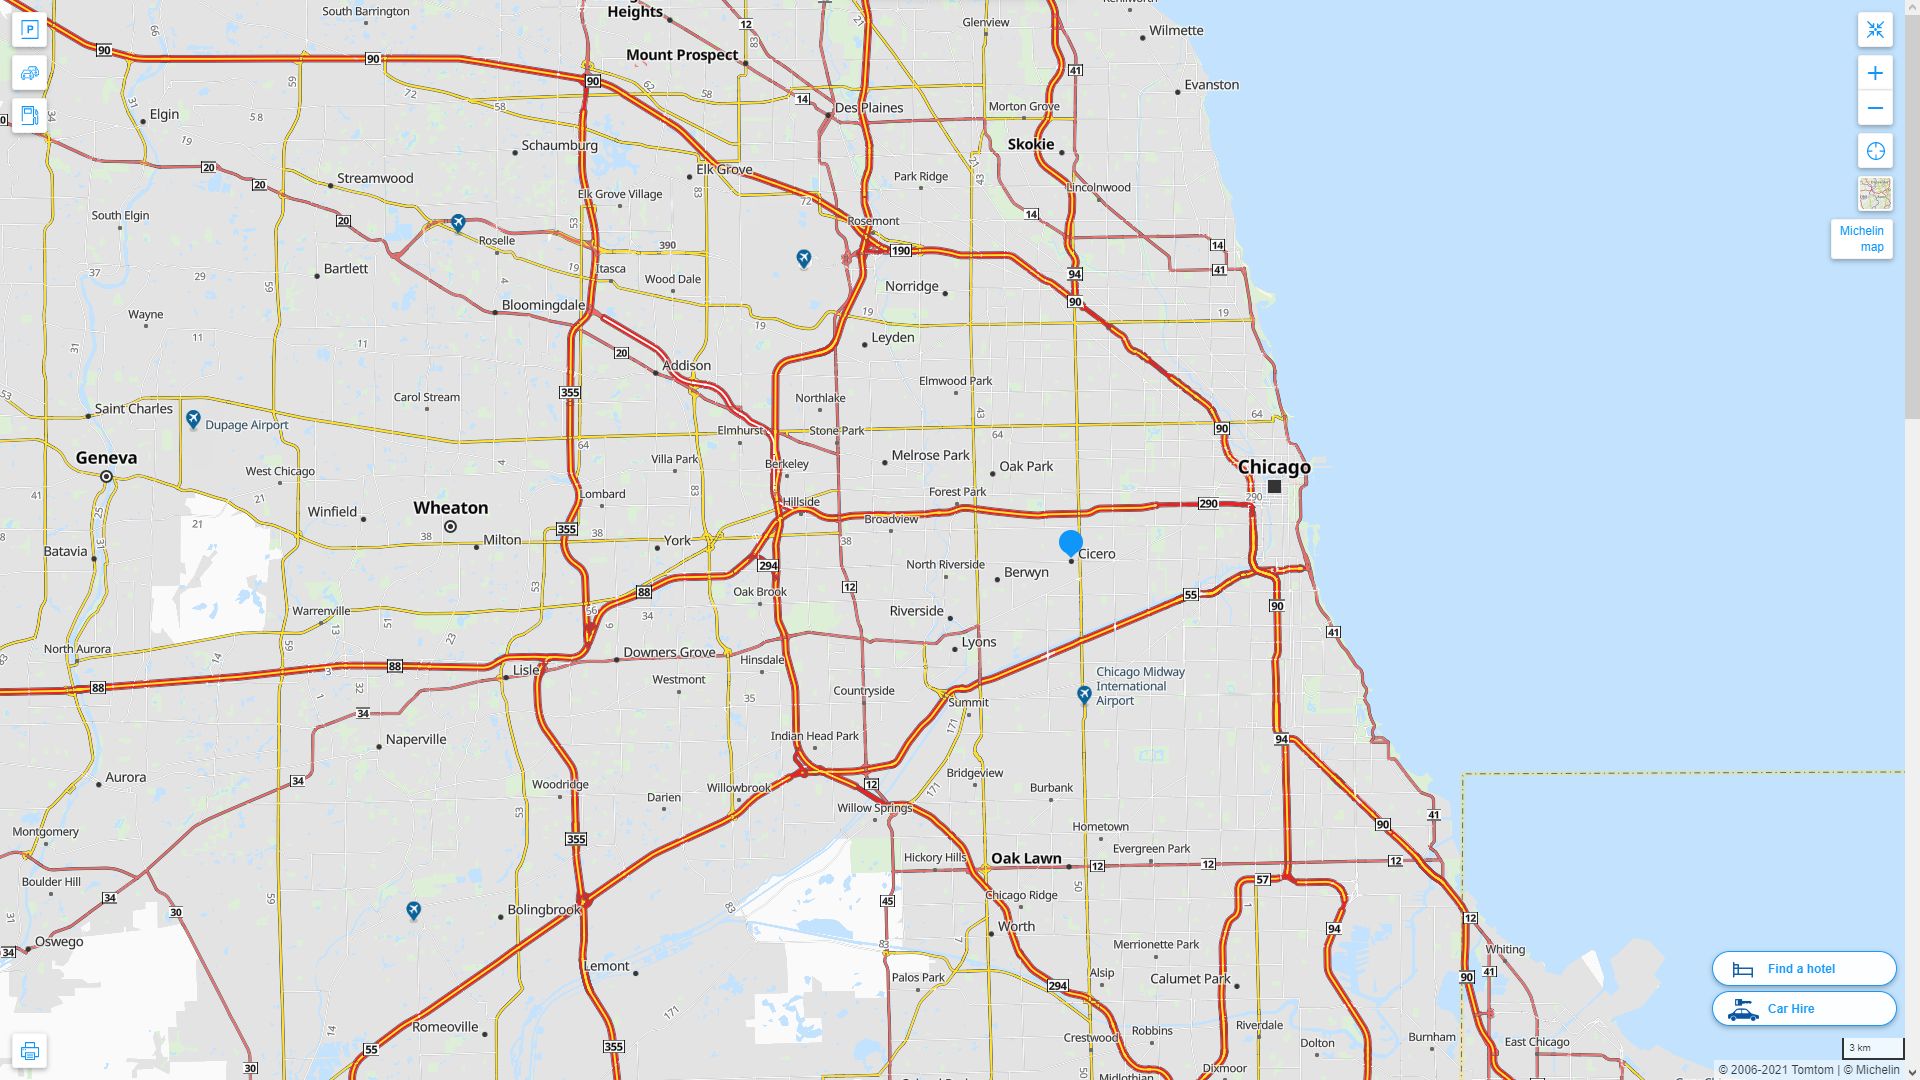 Cicero illinois Highway and Road Map